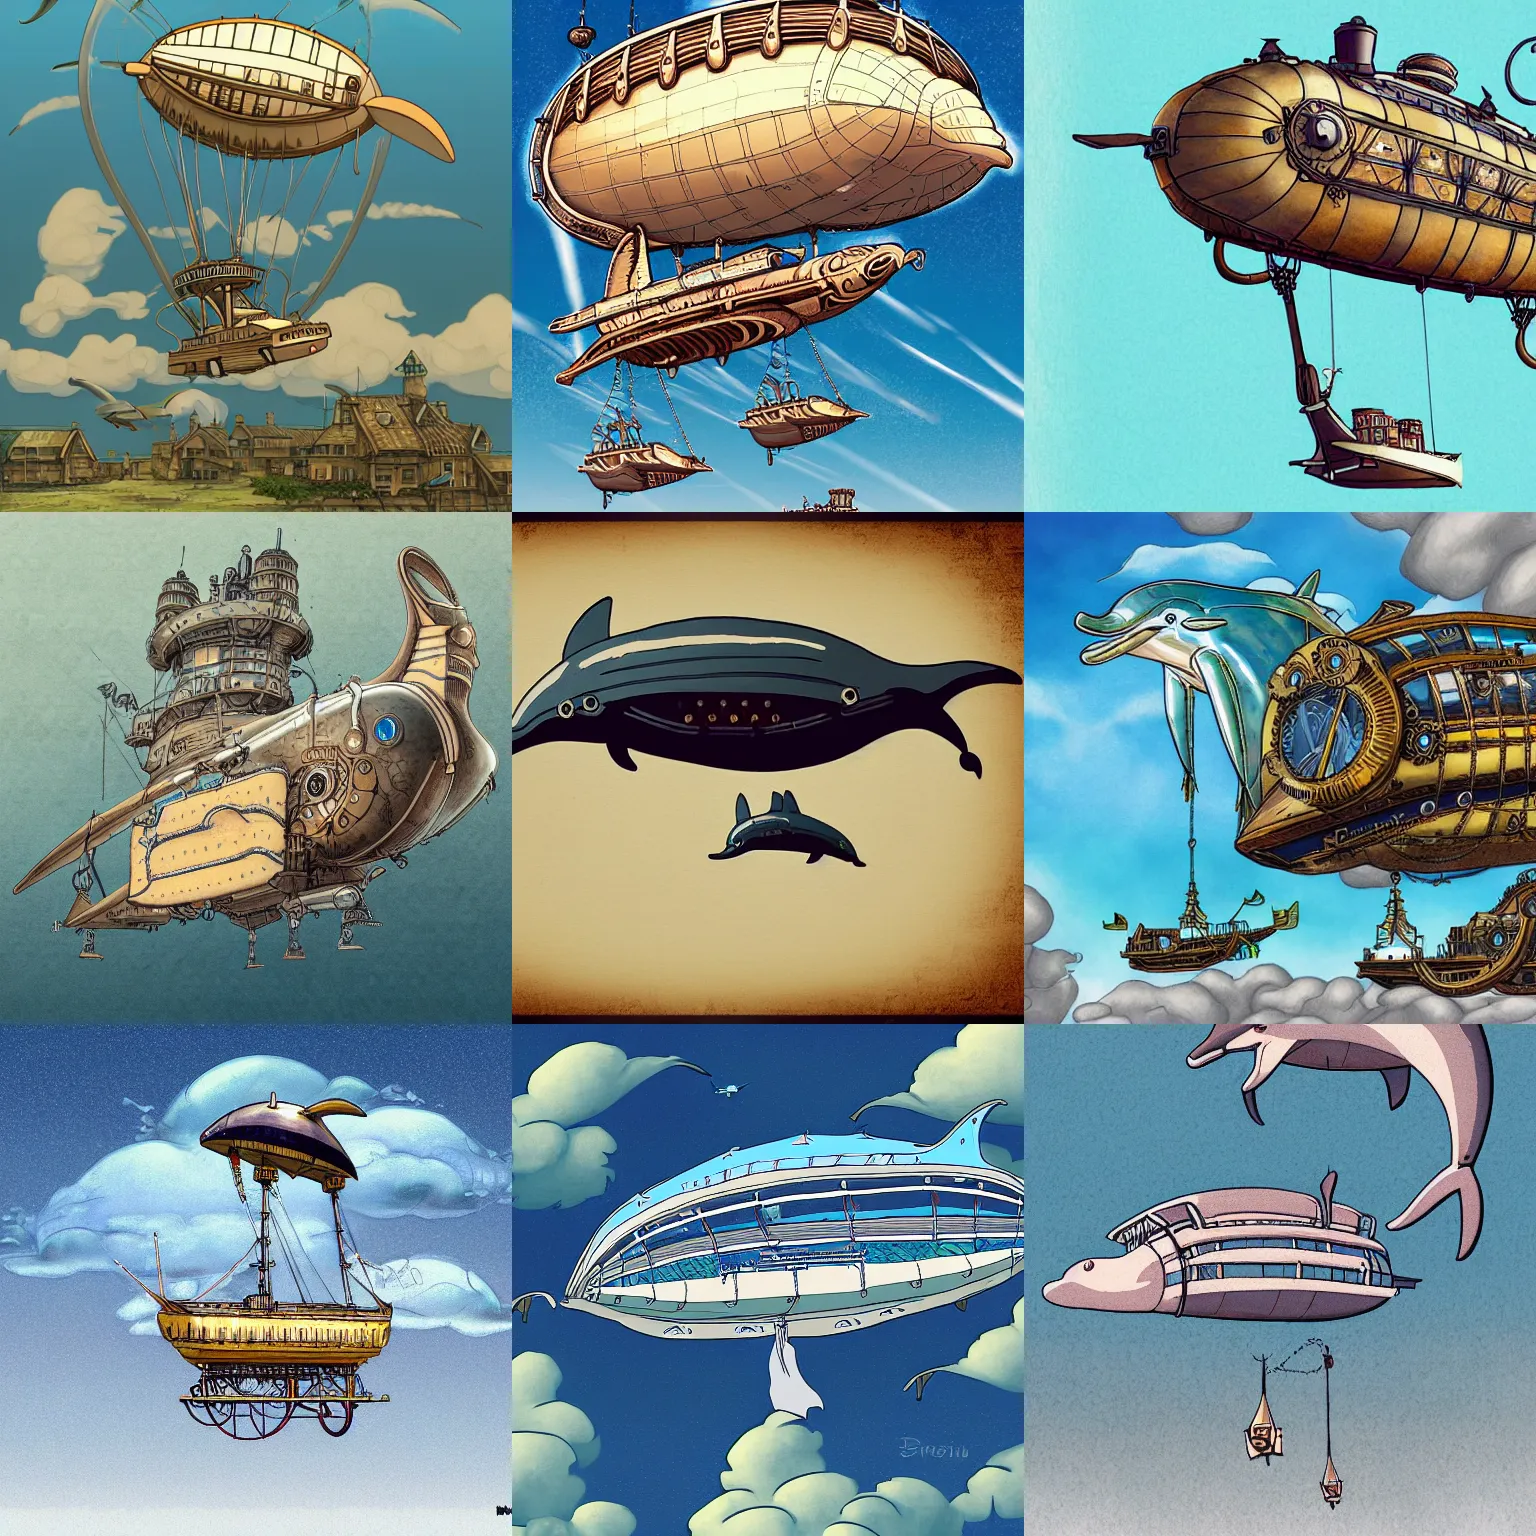 Prompt: a detailed illustration of a dolphin-shaped steampunk airship in the style of Ghibli